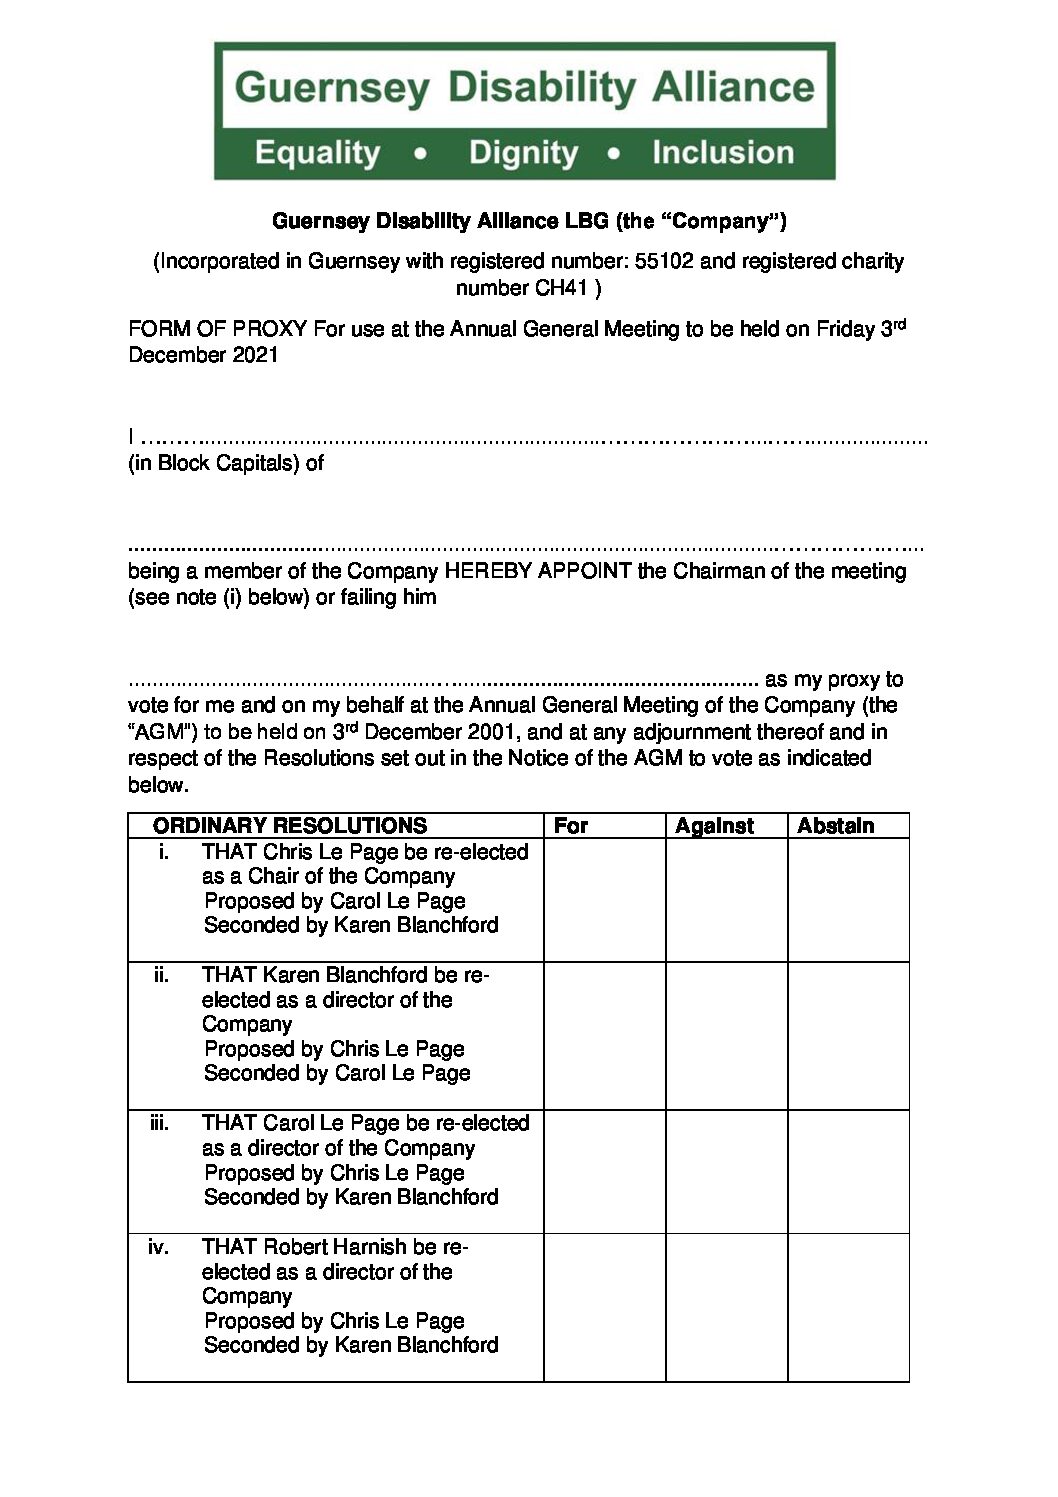 Proxy voting forms for the GDA's AGM on 3rd December 2021.